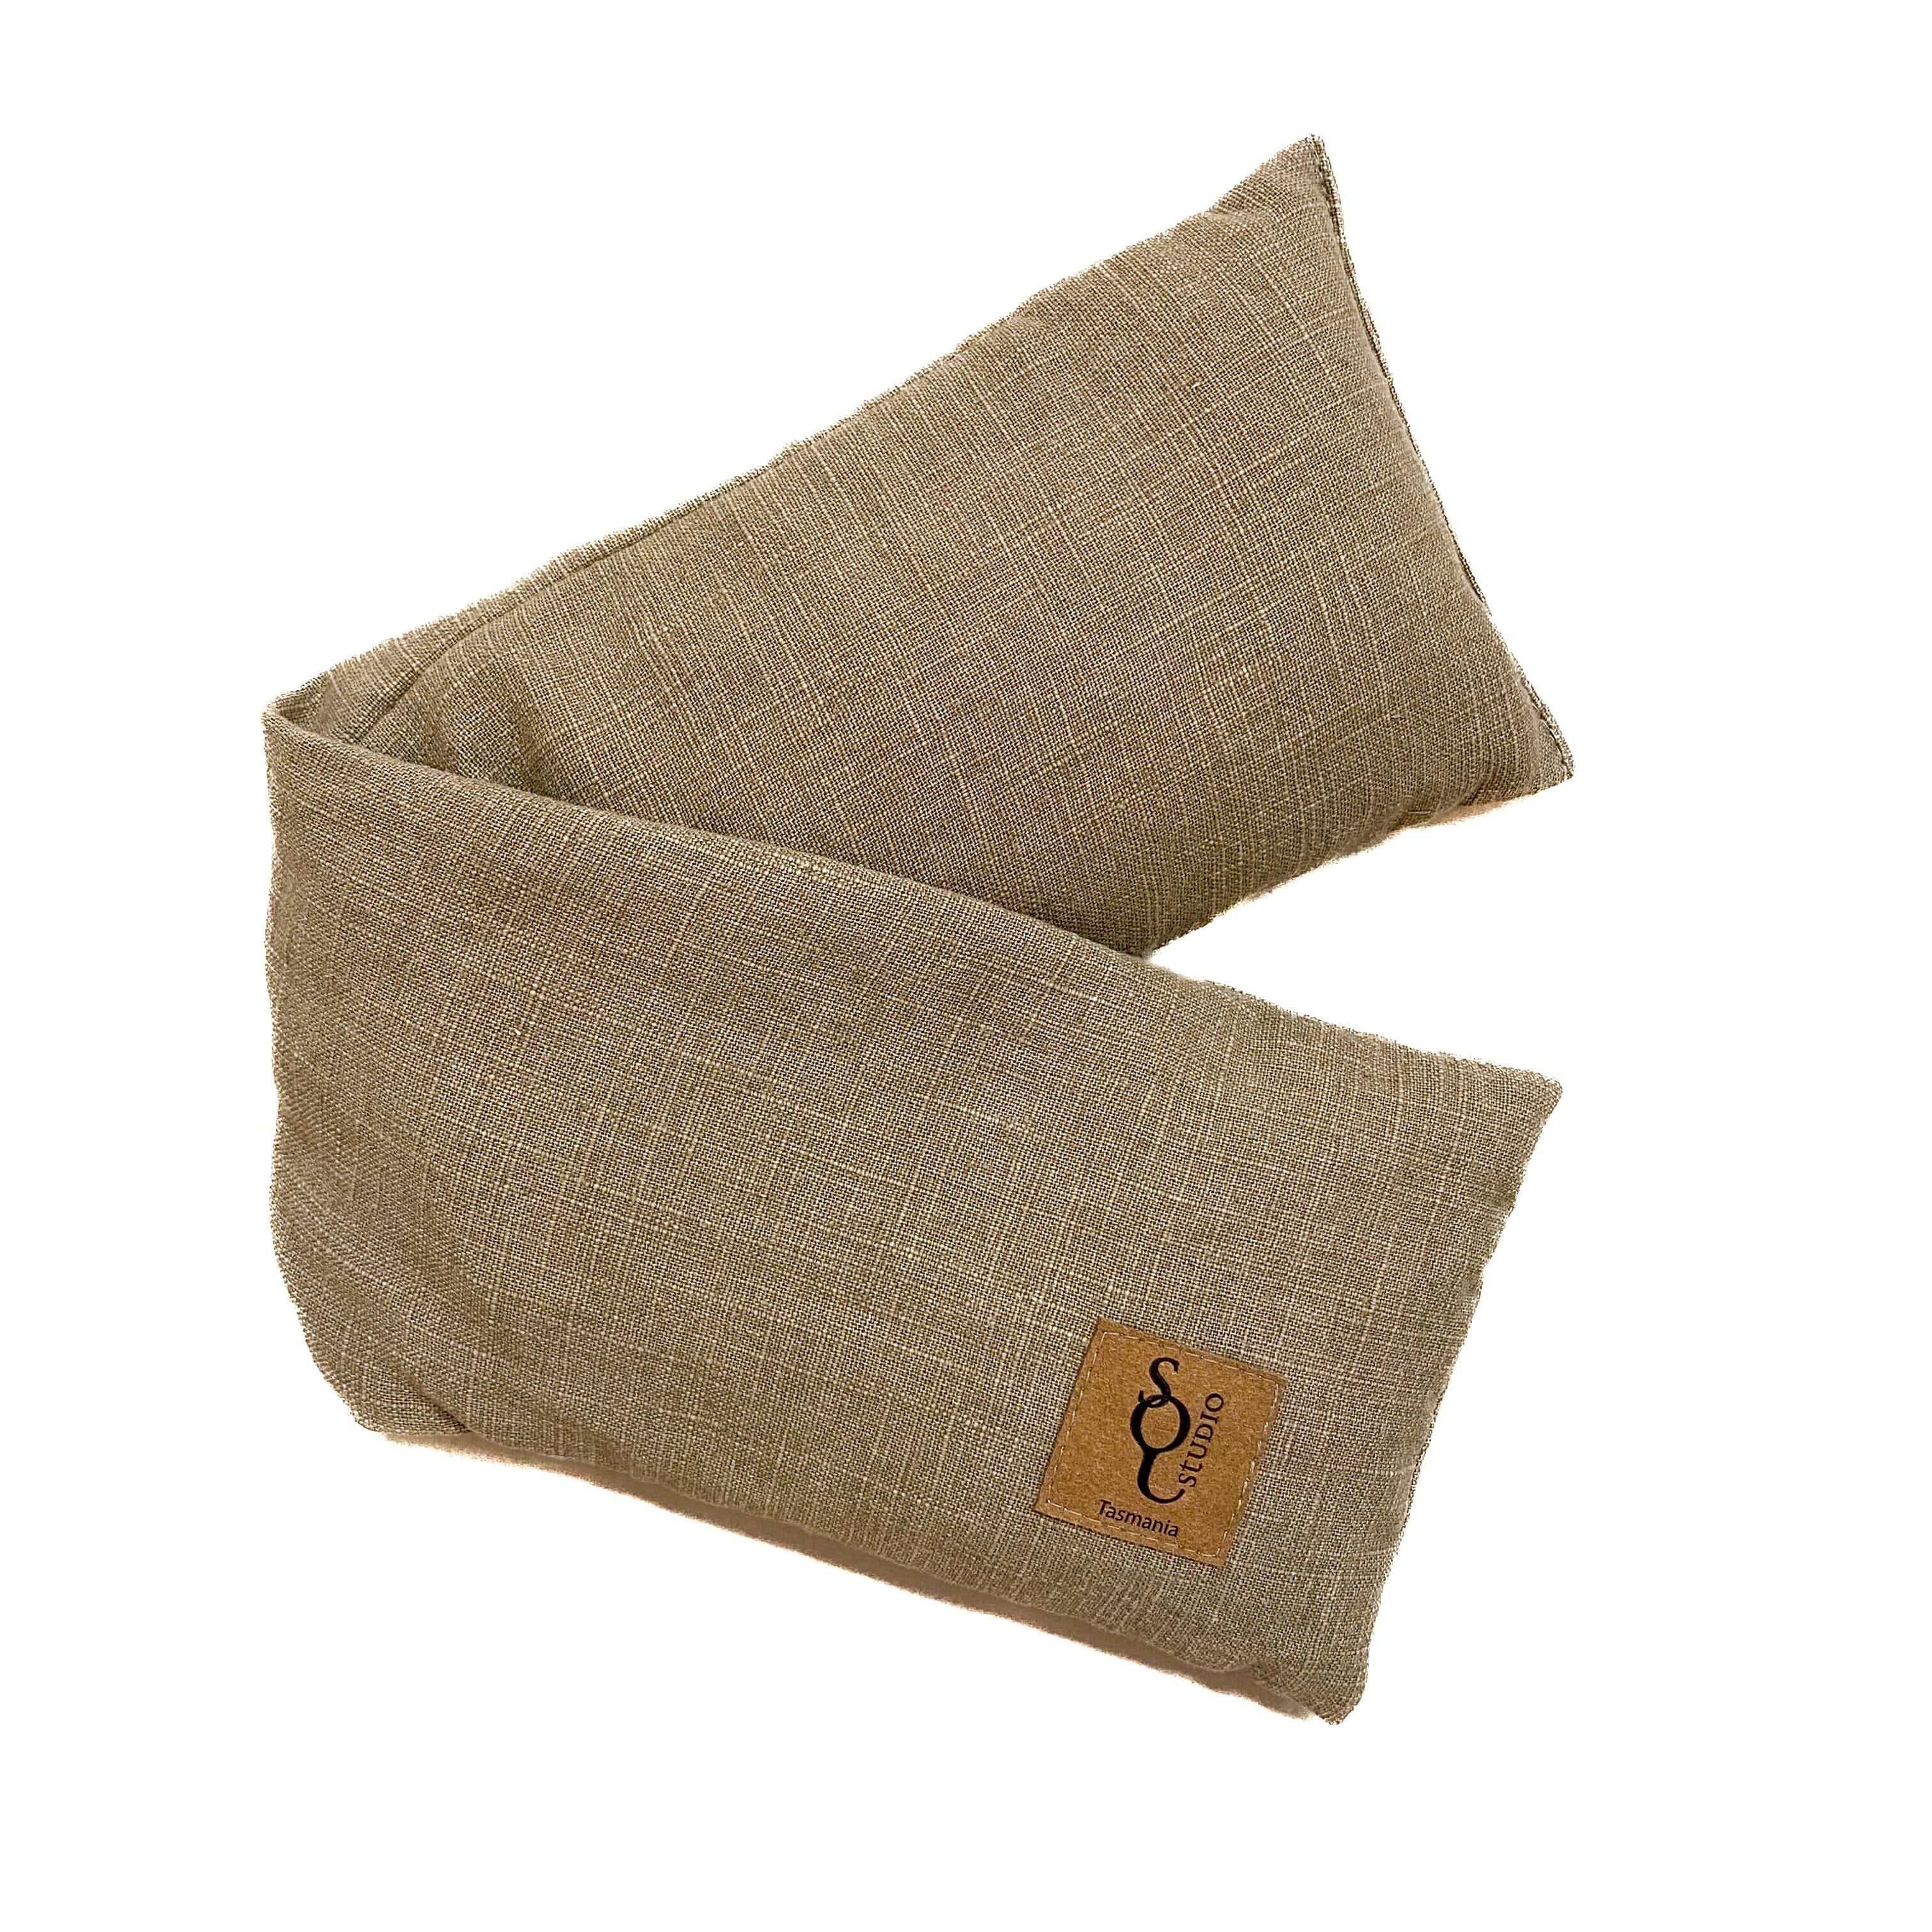 Aromatherapy Heat/Cold pack - Lupin & Lavender Heating Pads The Spotted Quoll Long Camel Slub 